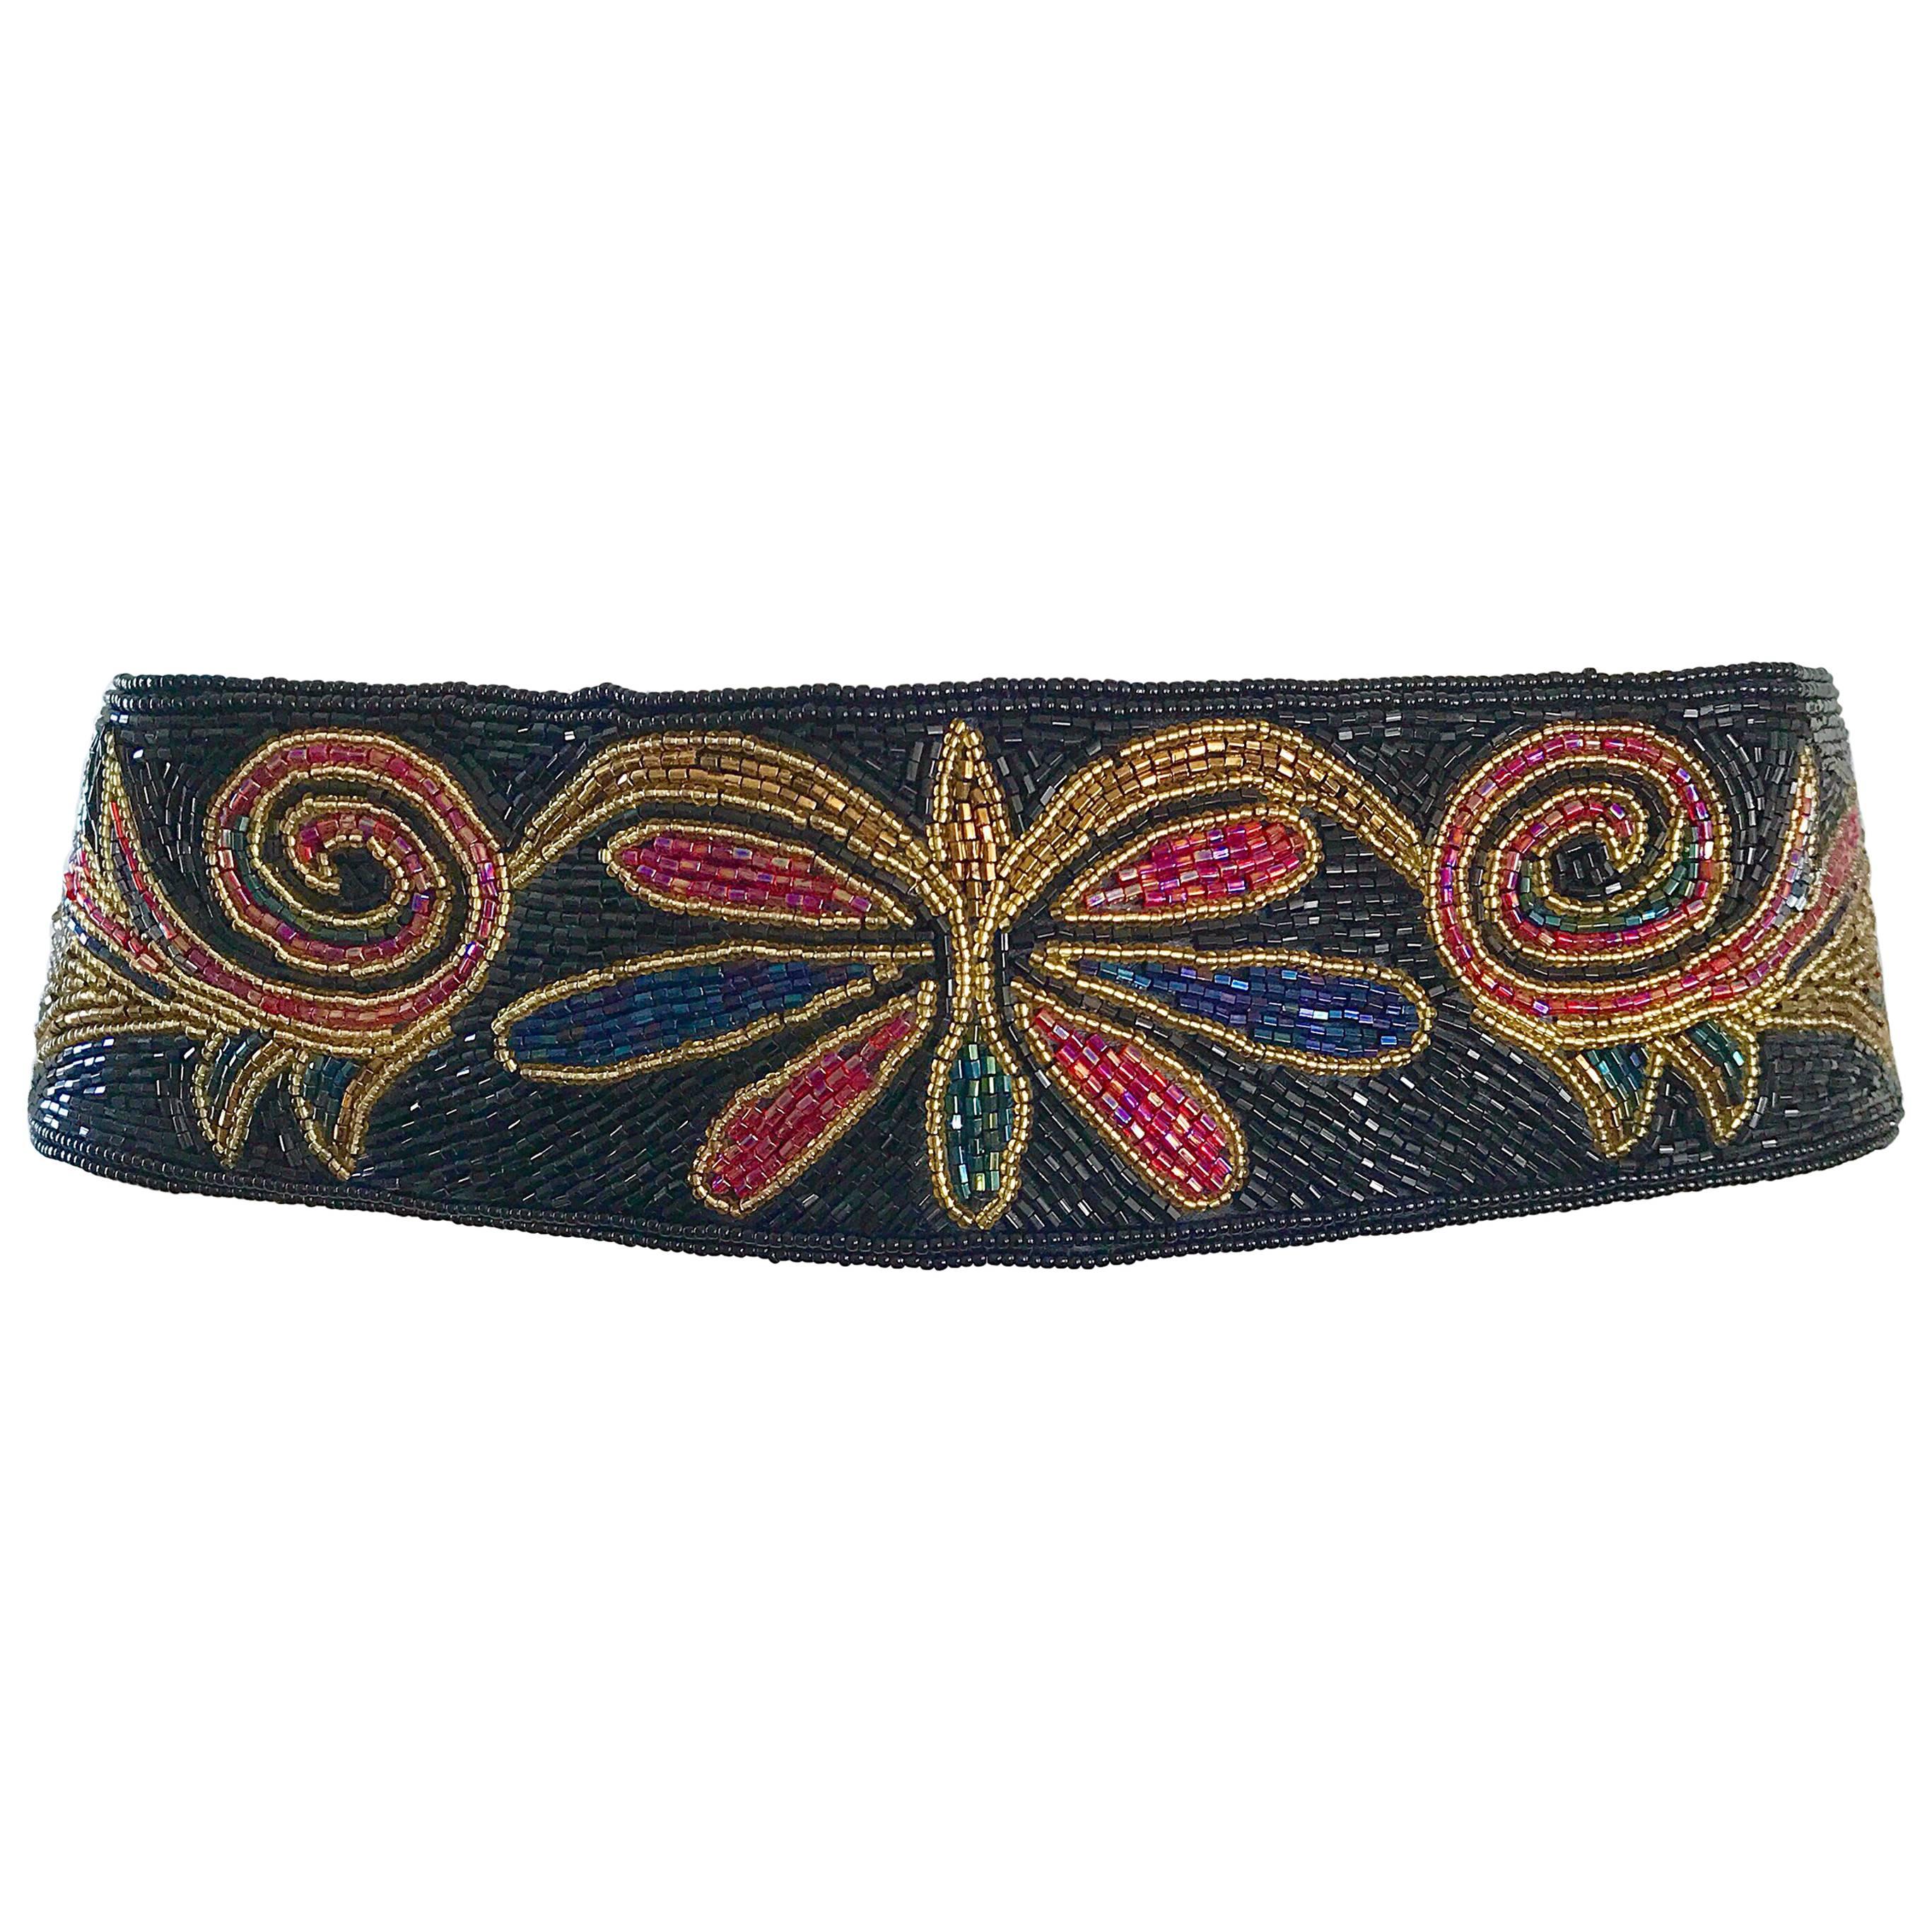 Fabulous 1980s Fully Beaded Butterfly Colorful Black Vintage 80s Belt